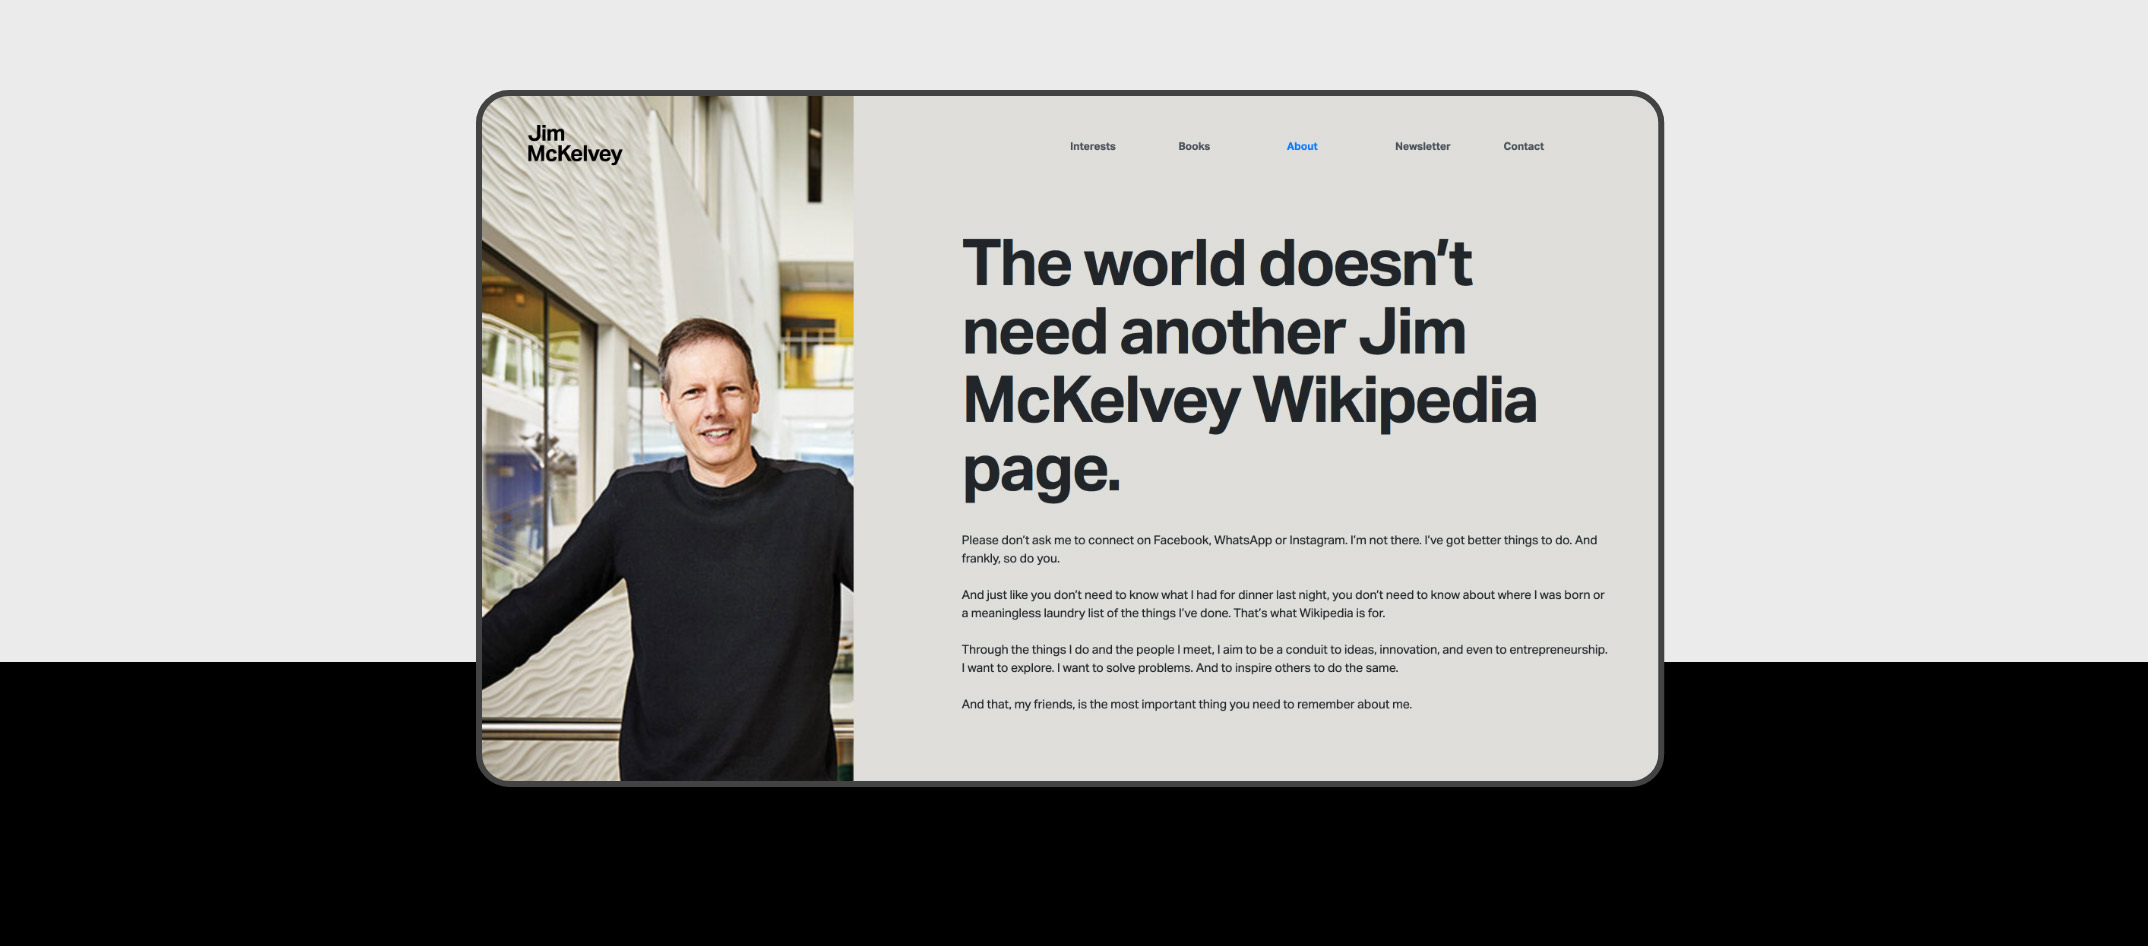 The About section of Jim McKelvey's website design features the headline 